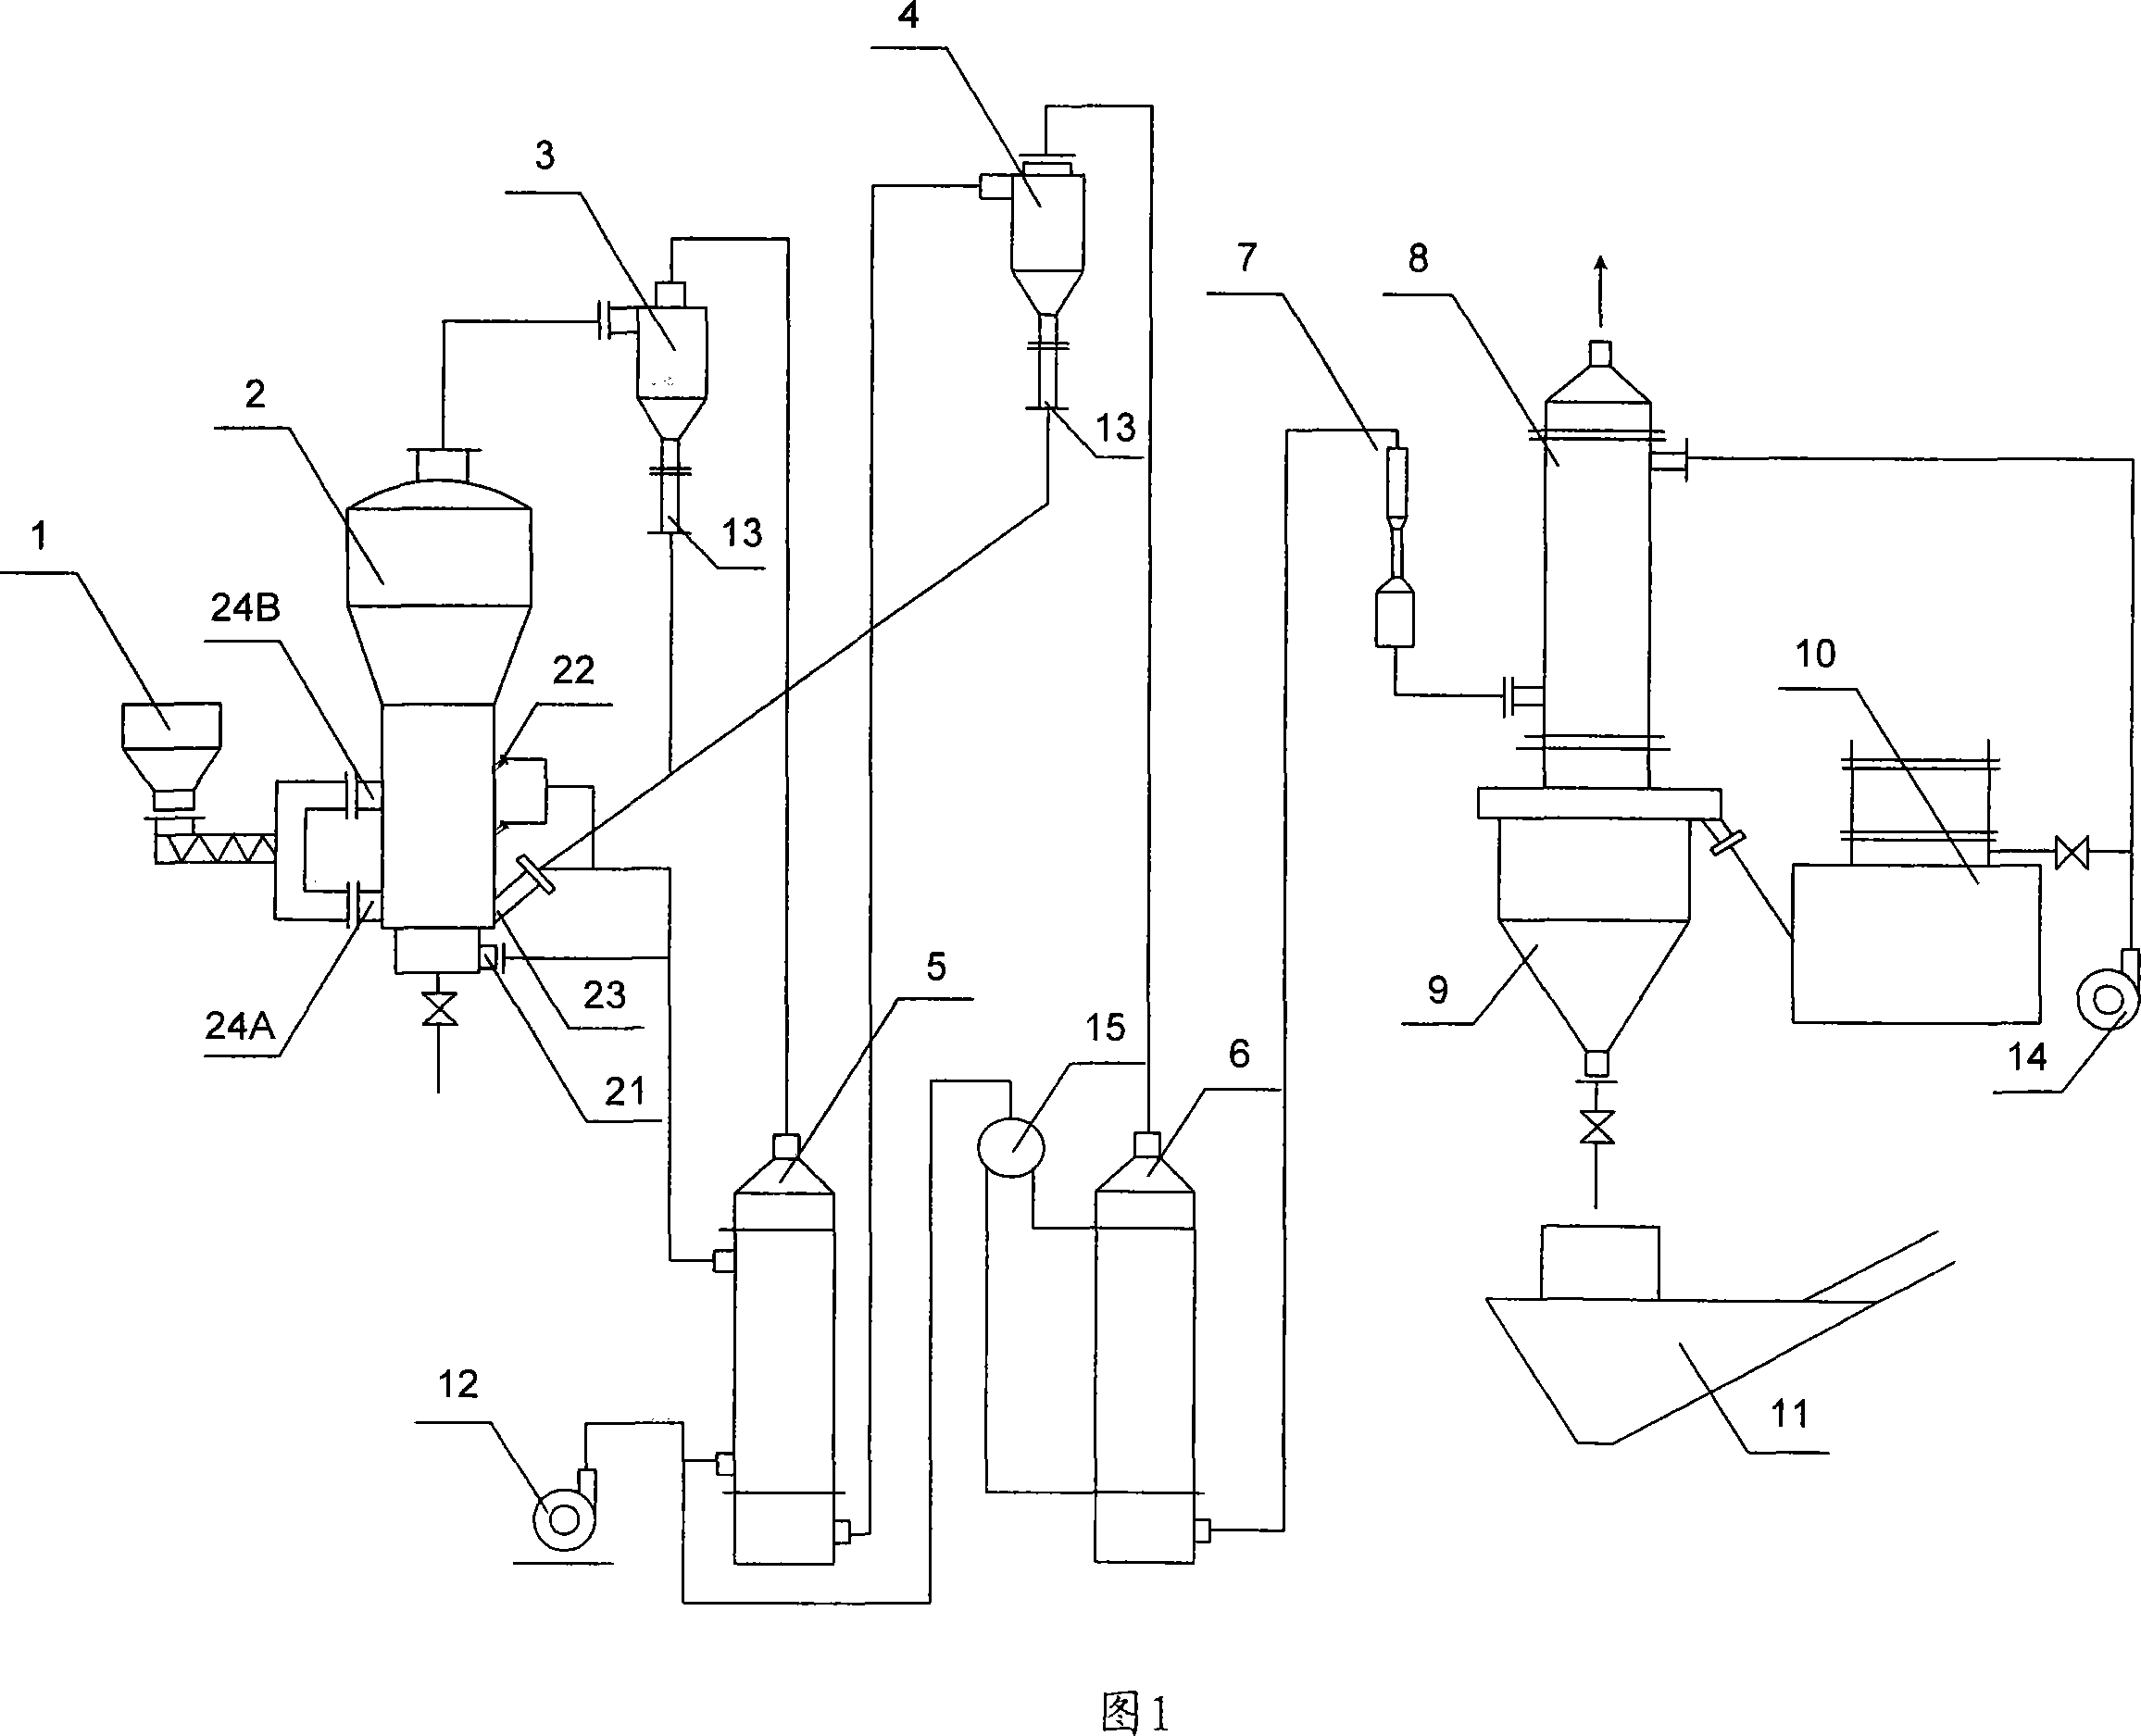 Circulating fluidized bed gas generator system